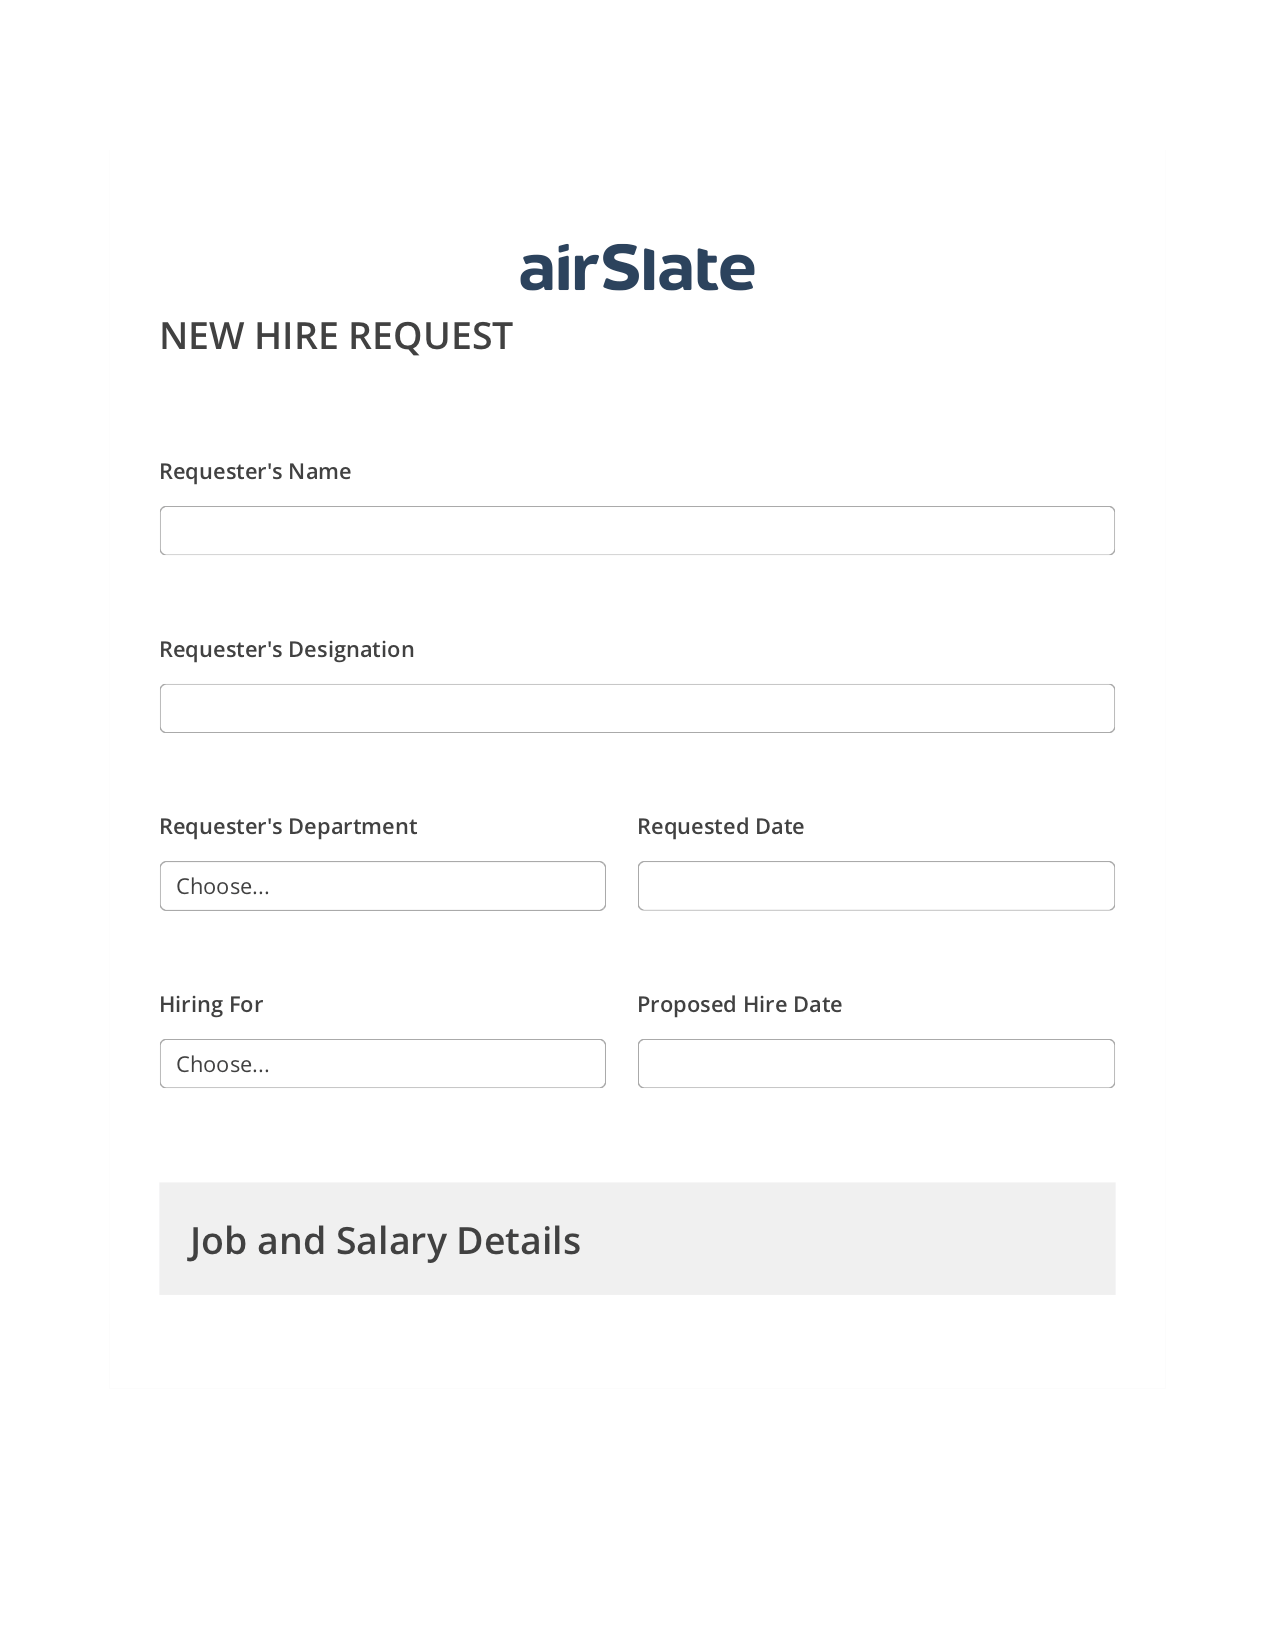 Hiring Request Workflow Pre-fill Document Bot, Update MS Dynamics 365 Record Bot, Export to NetSuite Bot